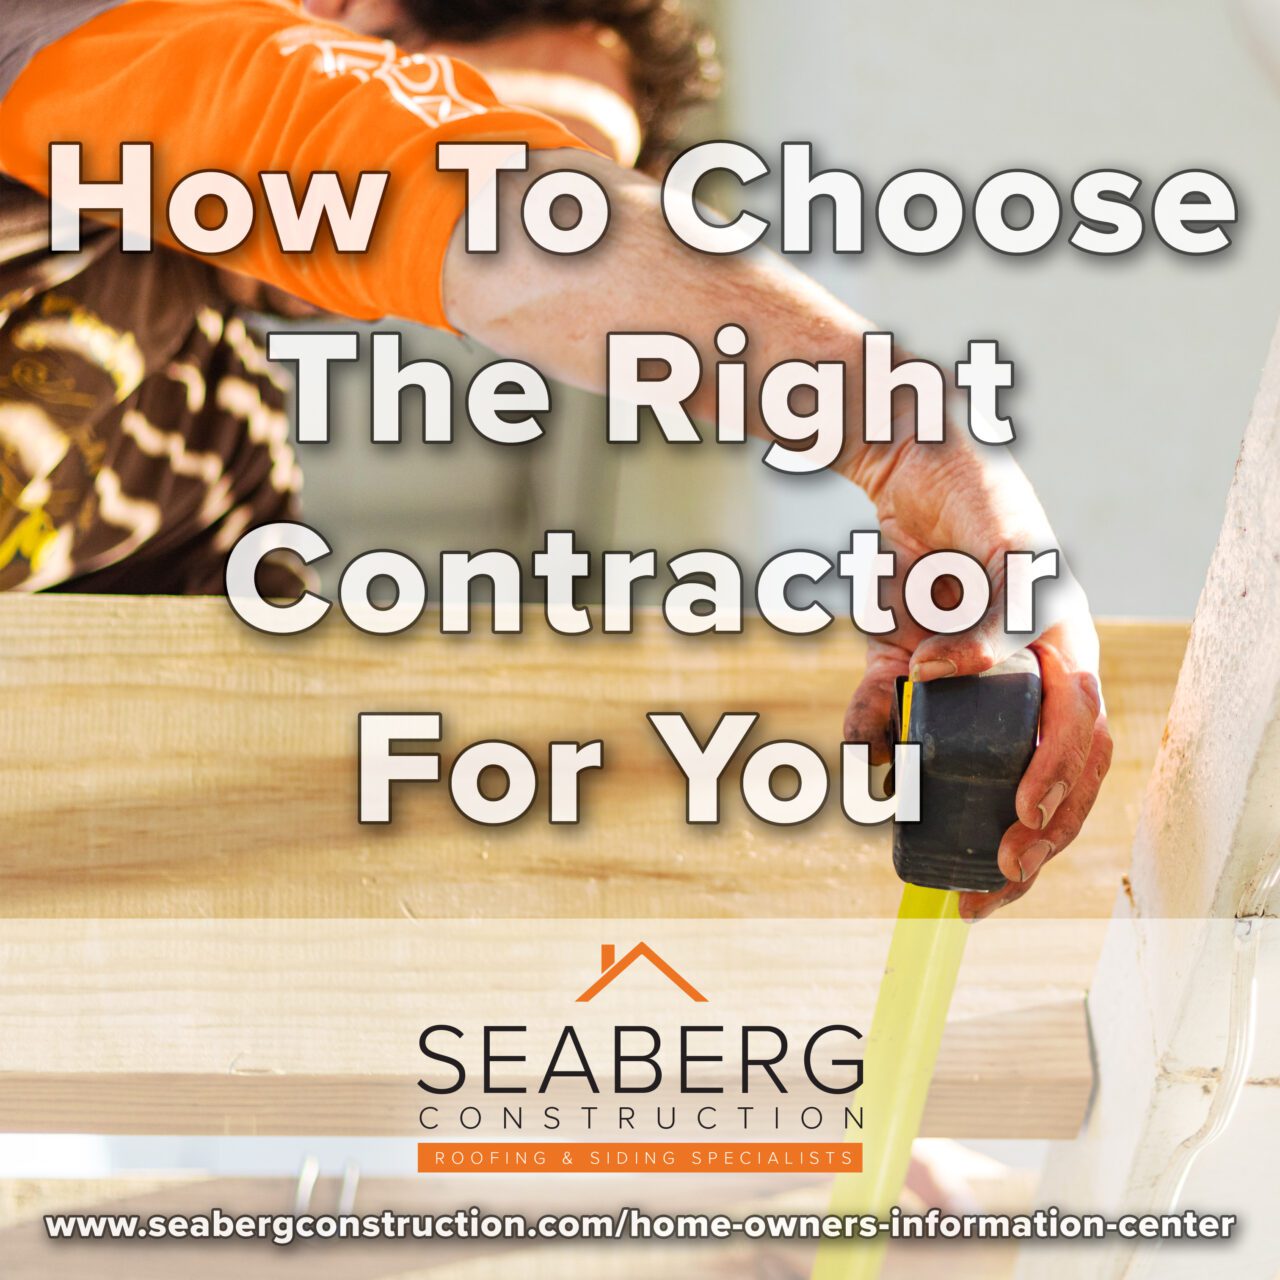 How To Choose The Right Contractor For You